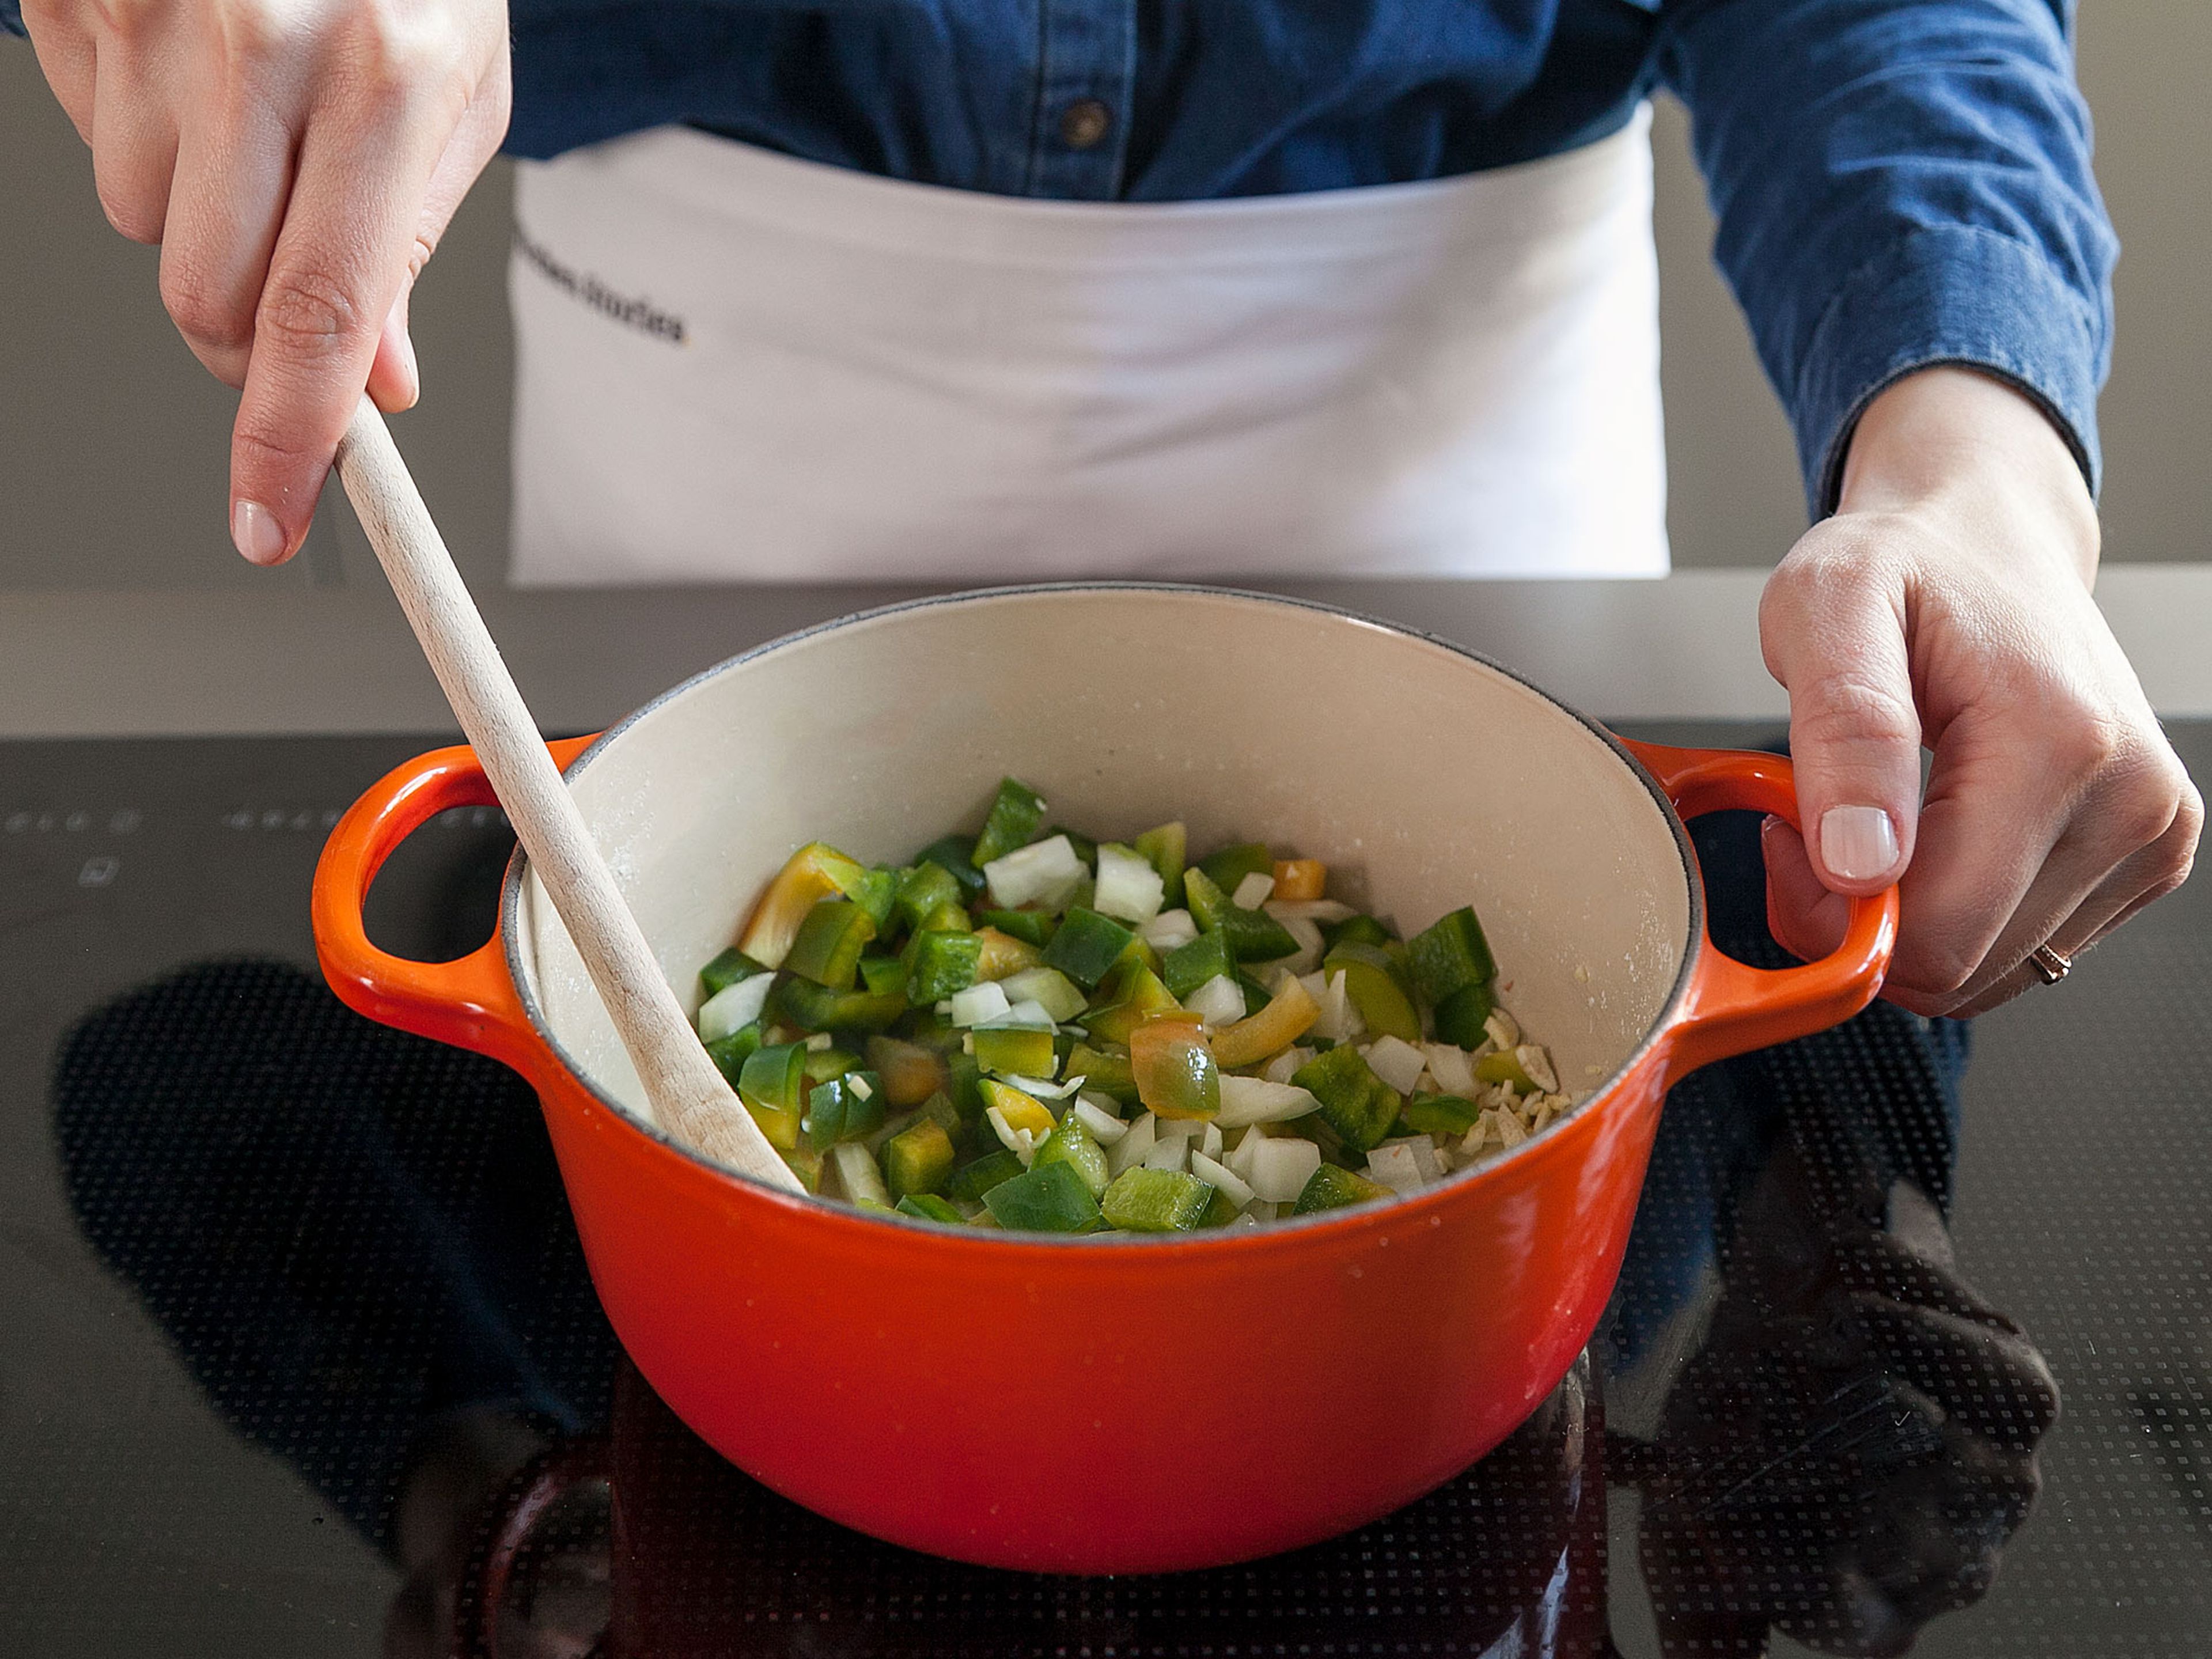 Heat oil in the same saucepan over medium-high heat. Add chopped onion, bell pepper, and garlic. Sauté, stirring occasionally, for approx. 3 – 4 min., or until tender.